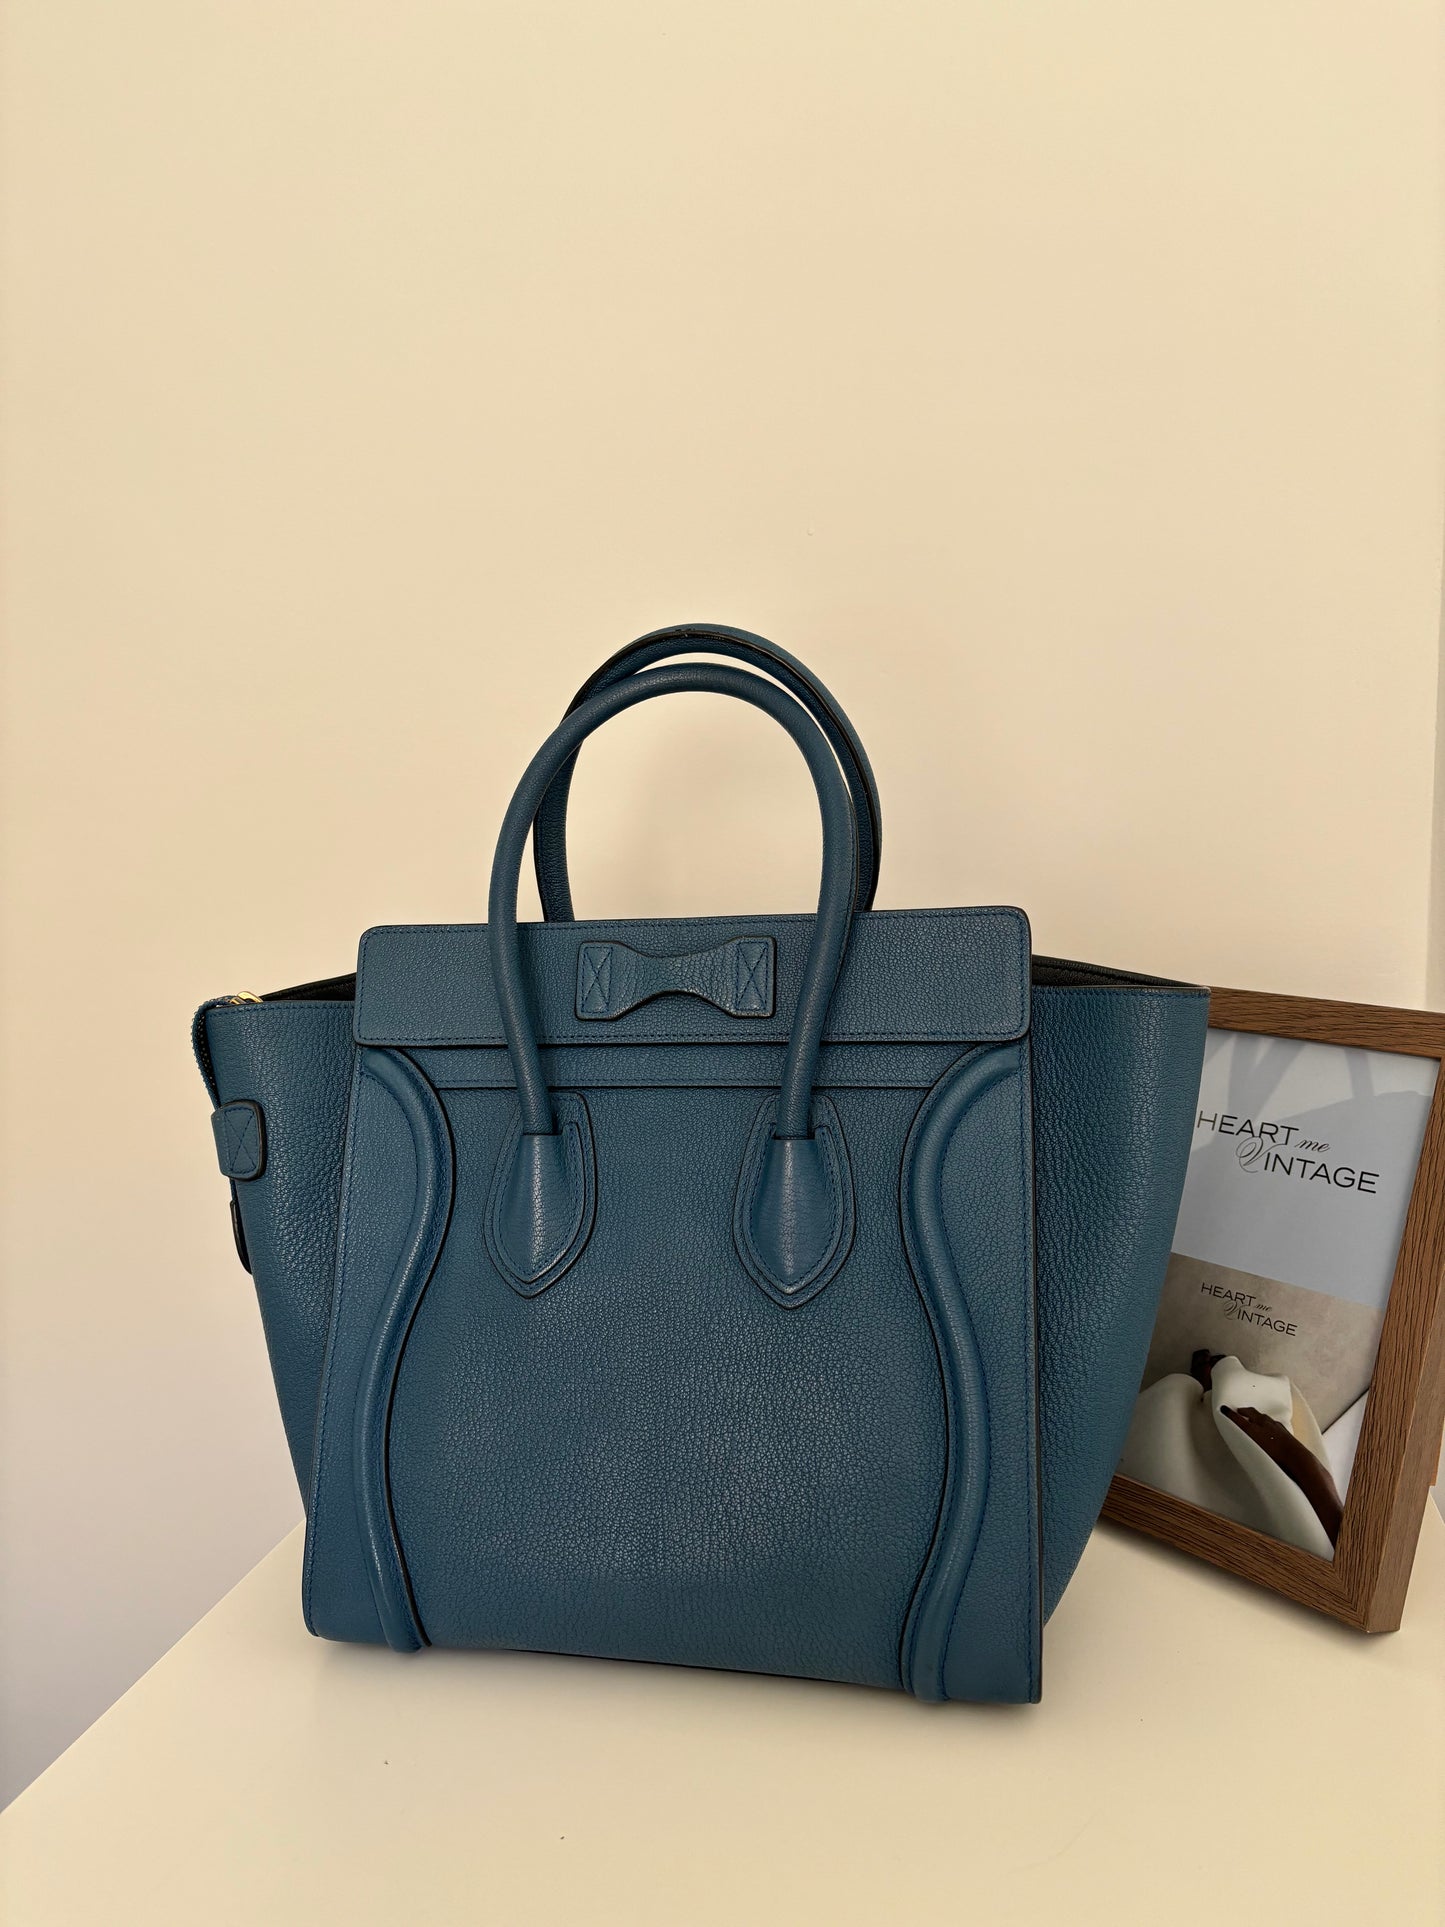 Celine Mini Luggage Tote in Blue Grained Leather